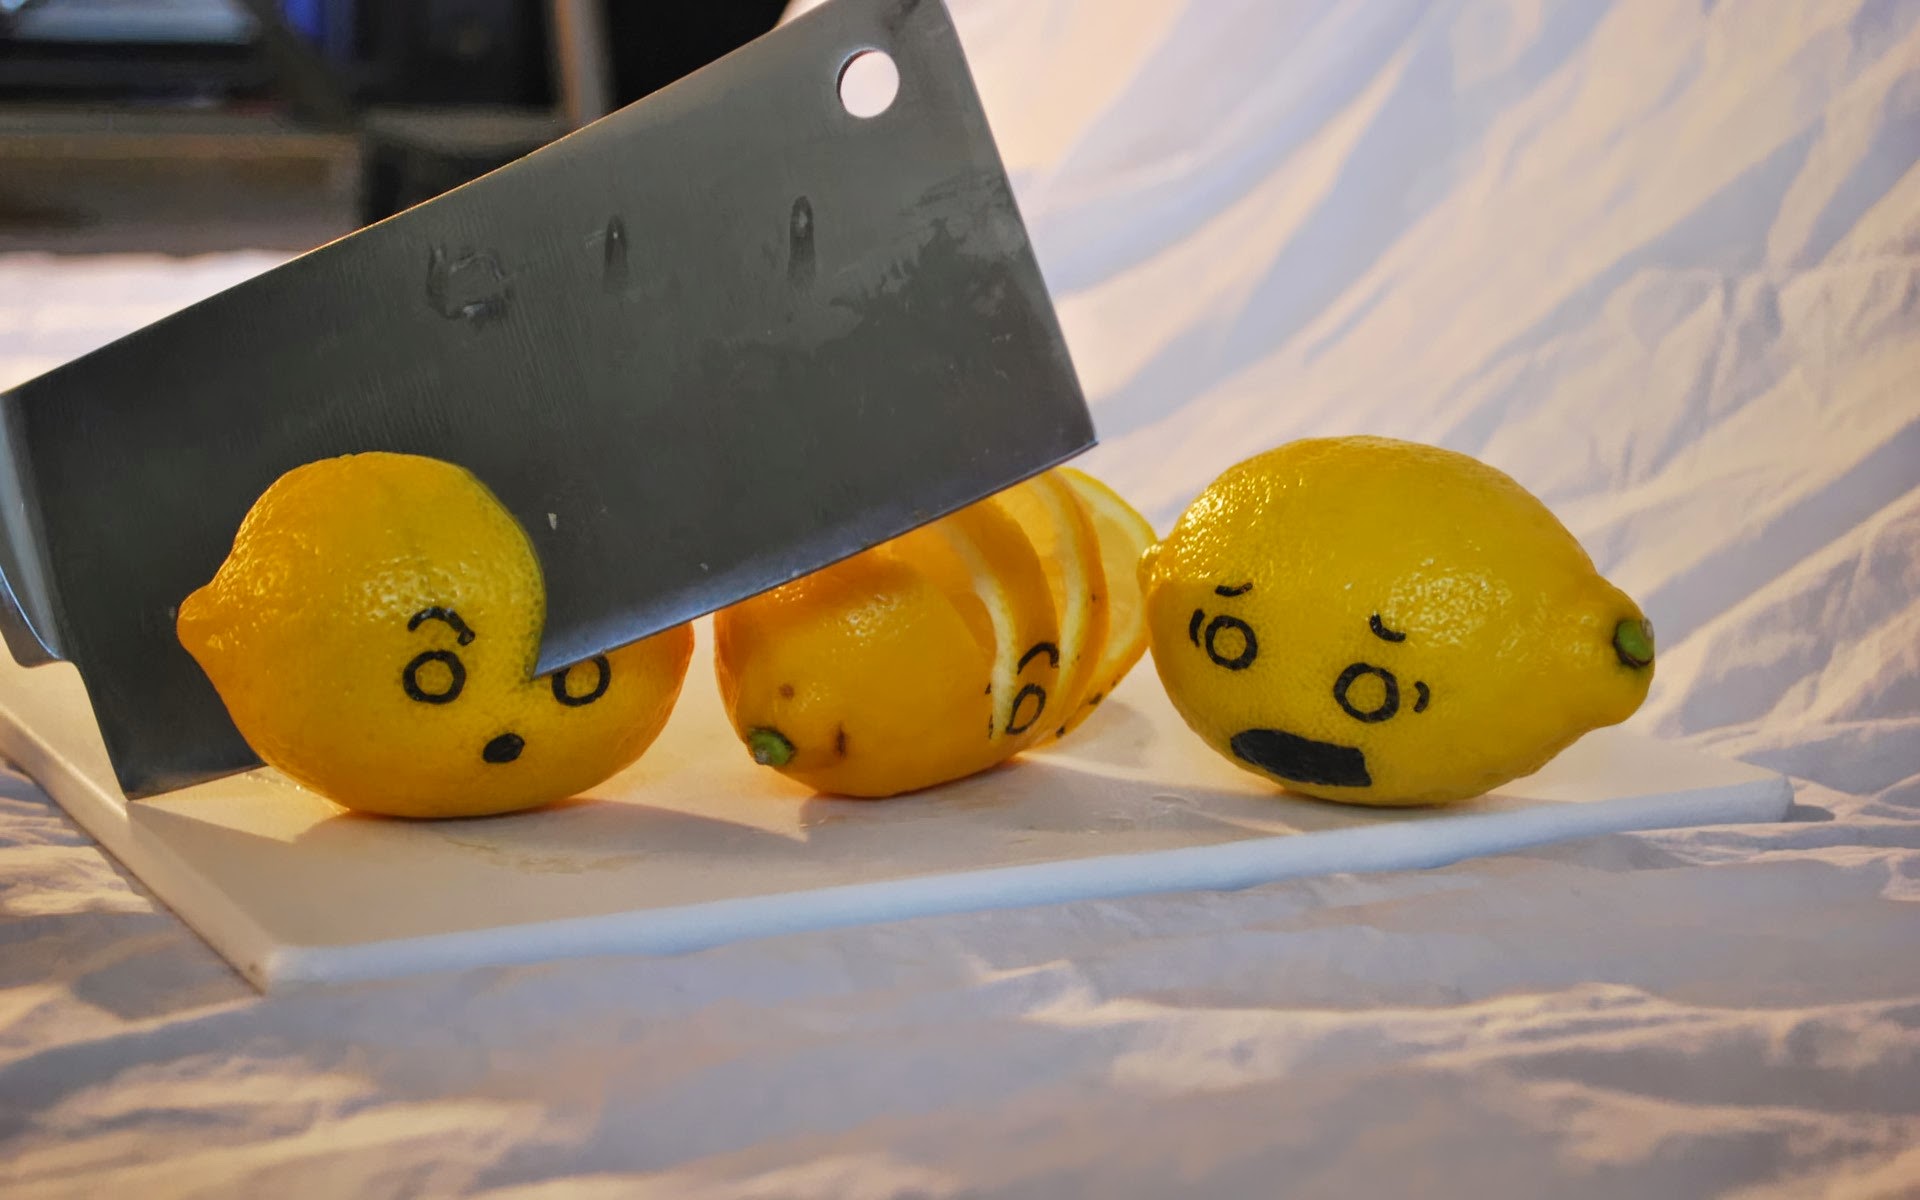 Lemons being chopped by a knife